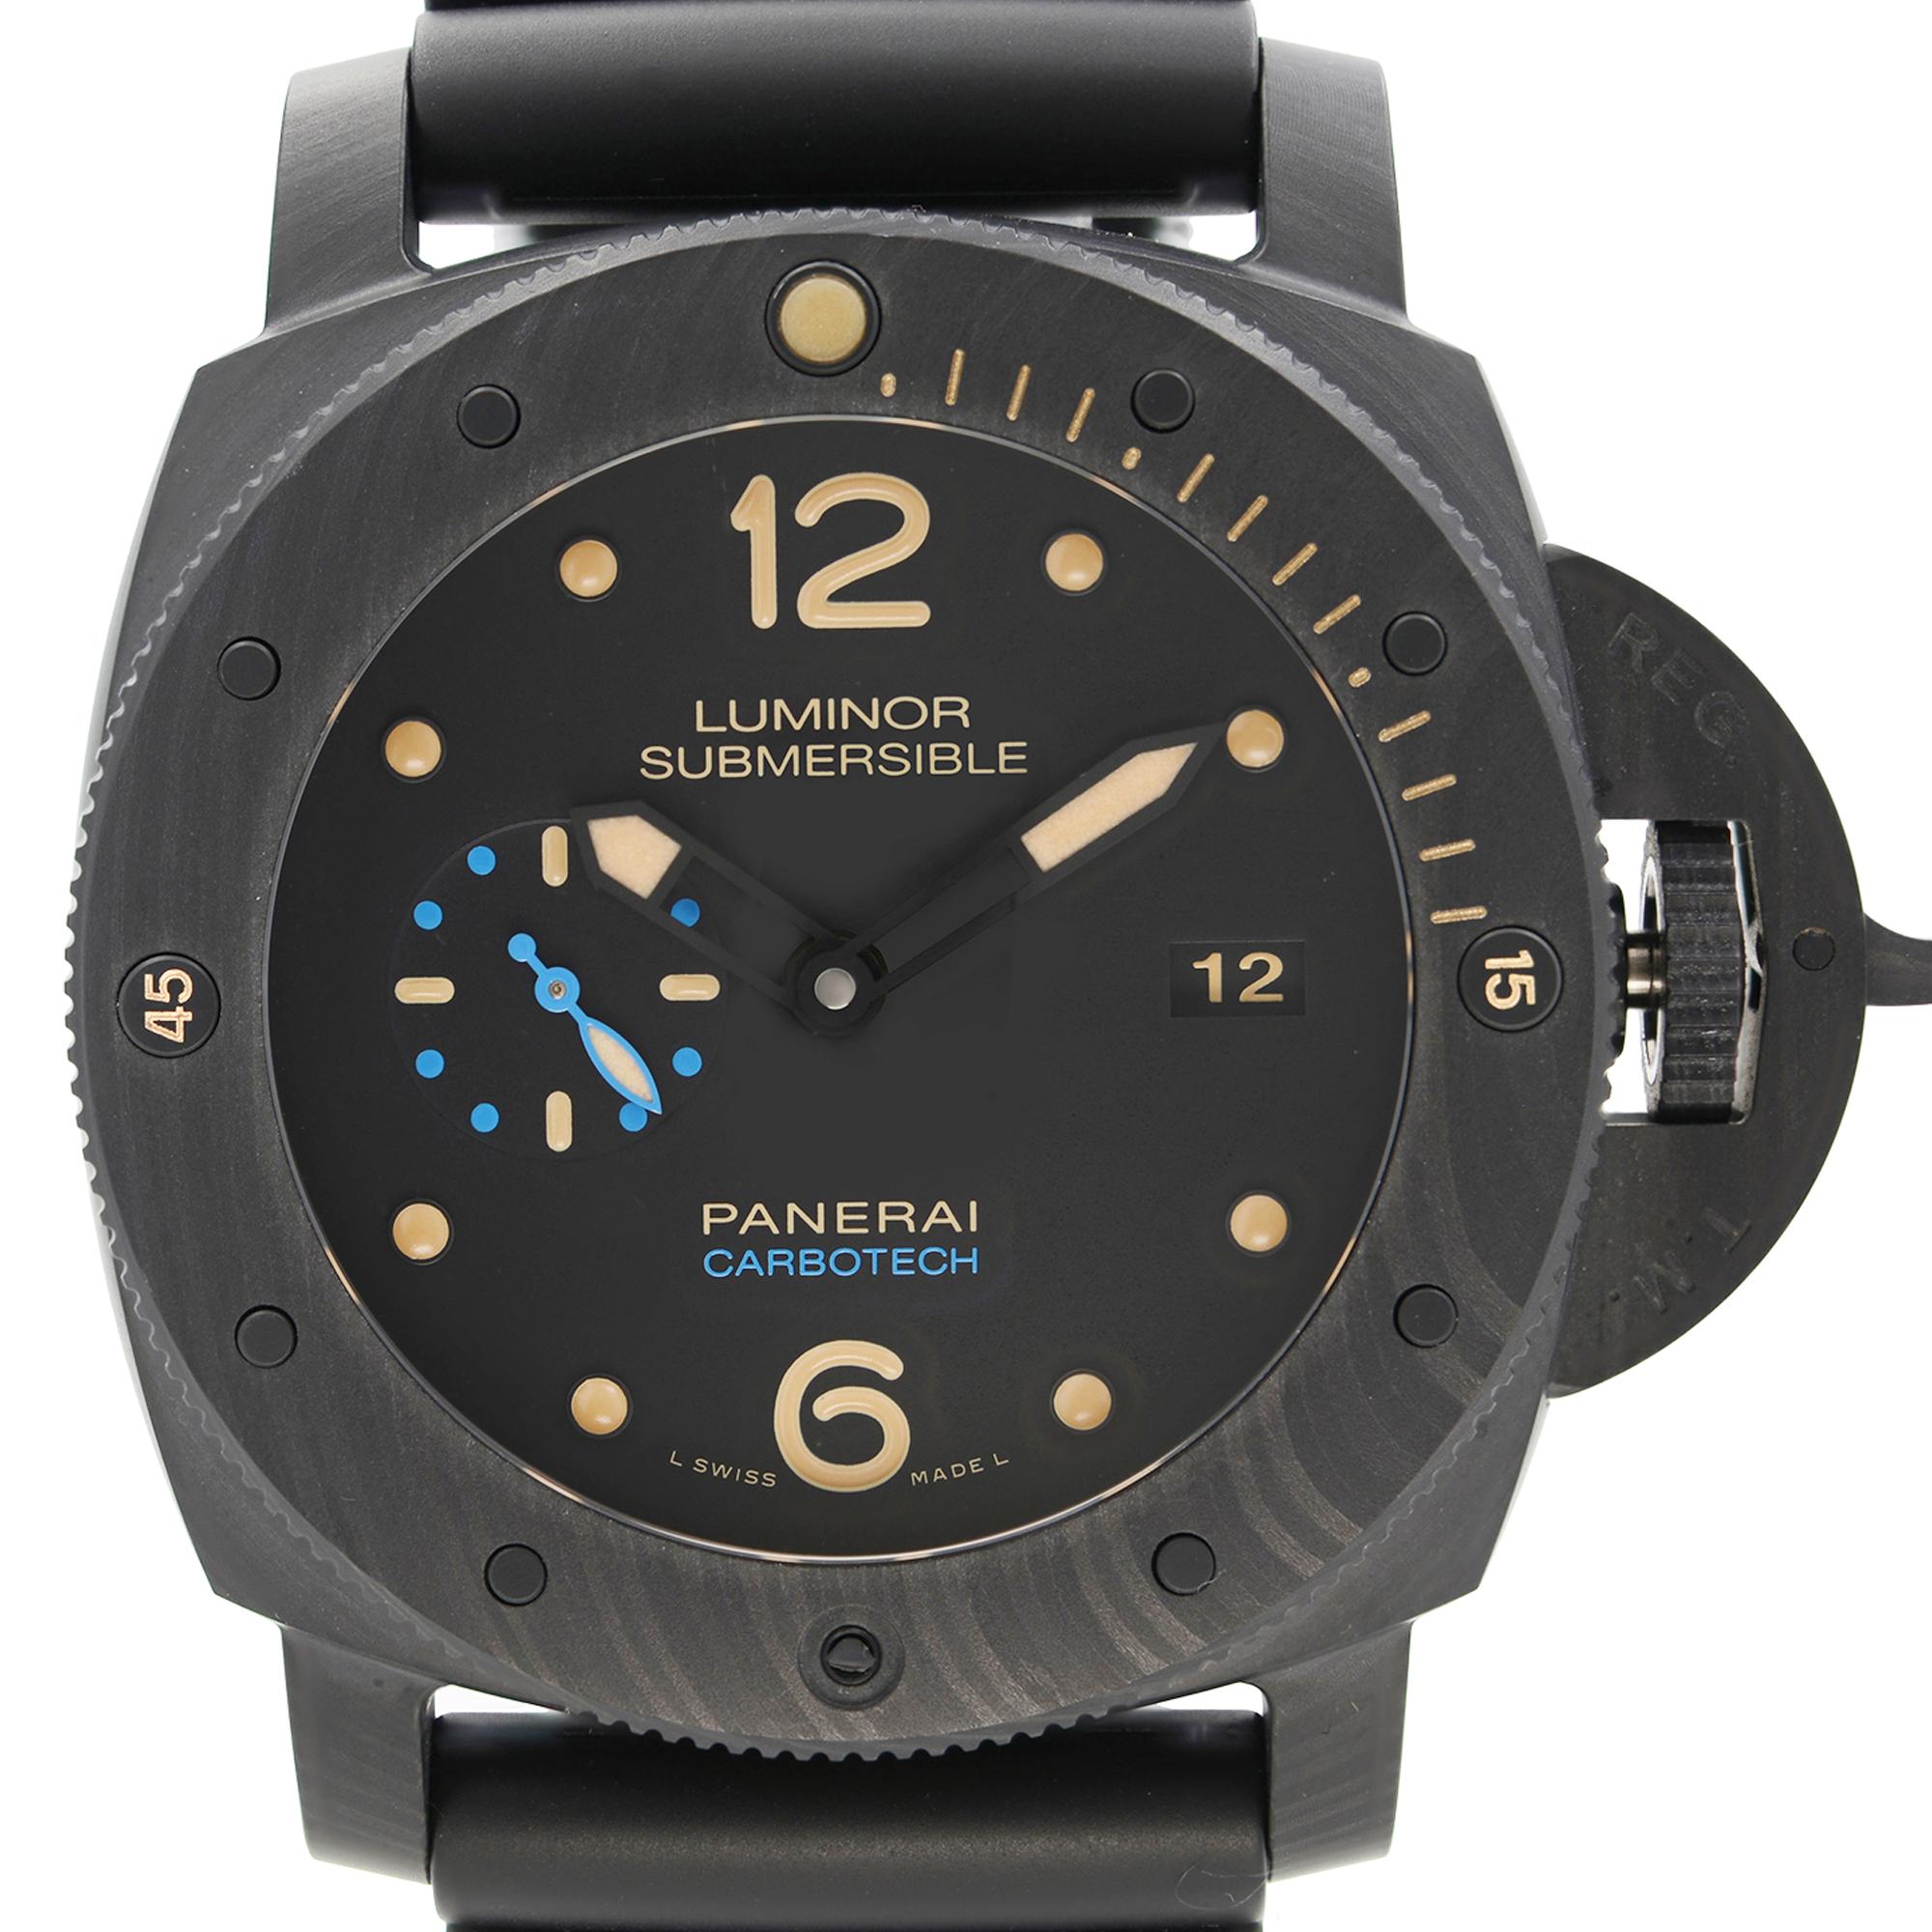 Excellent condition. The original box and papers are not included. Comes with a presentation box and an authenticity card. 

Brand: Panerai  Department: Men  Model Number: PAM00616  Country/Region of Manufacture: Switzerland  Model: Panerai Luminor